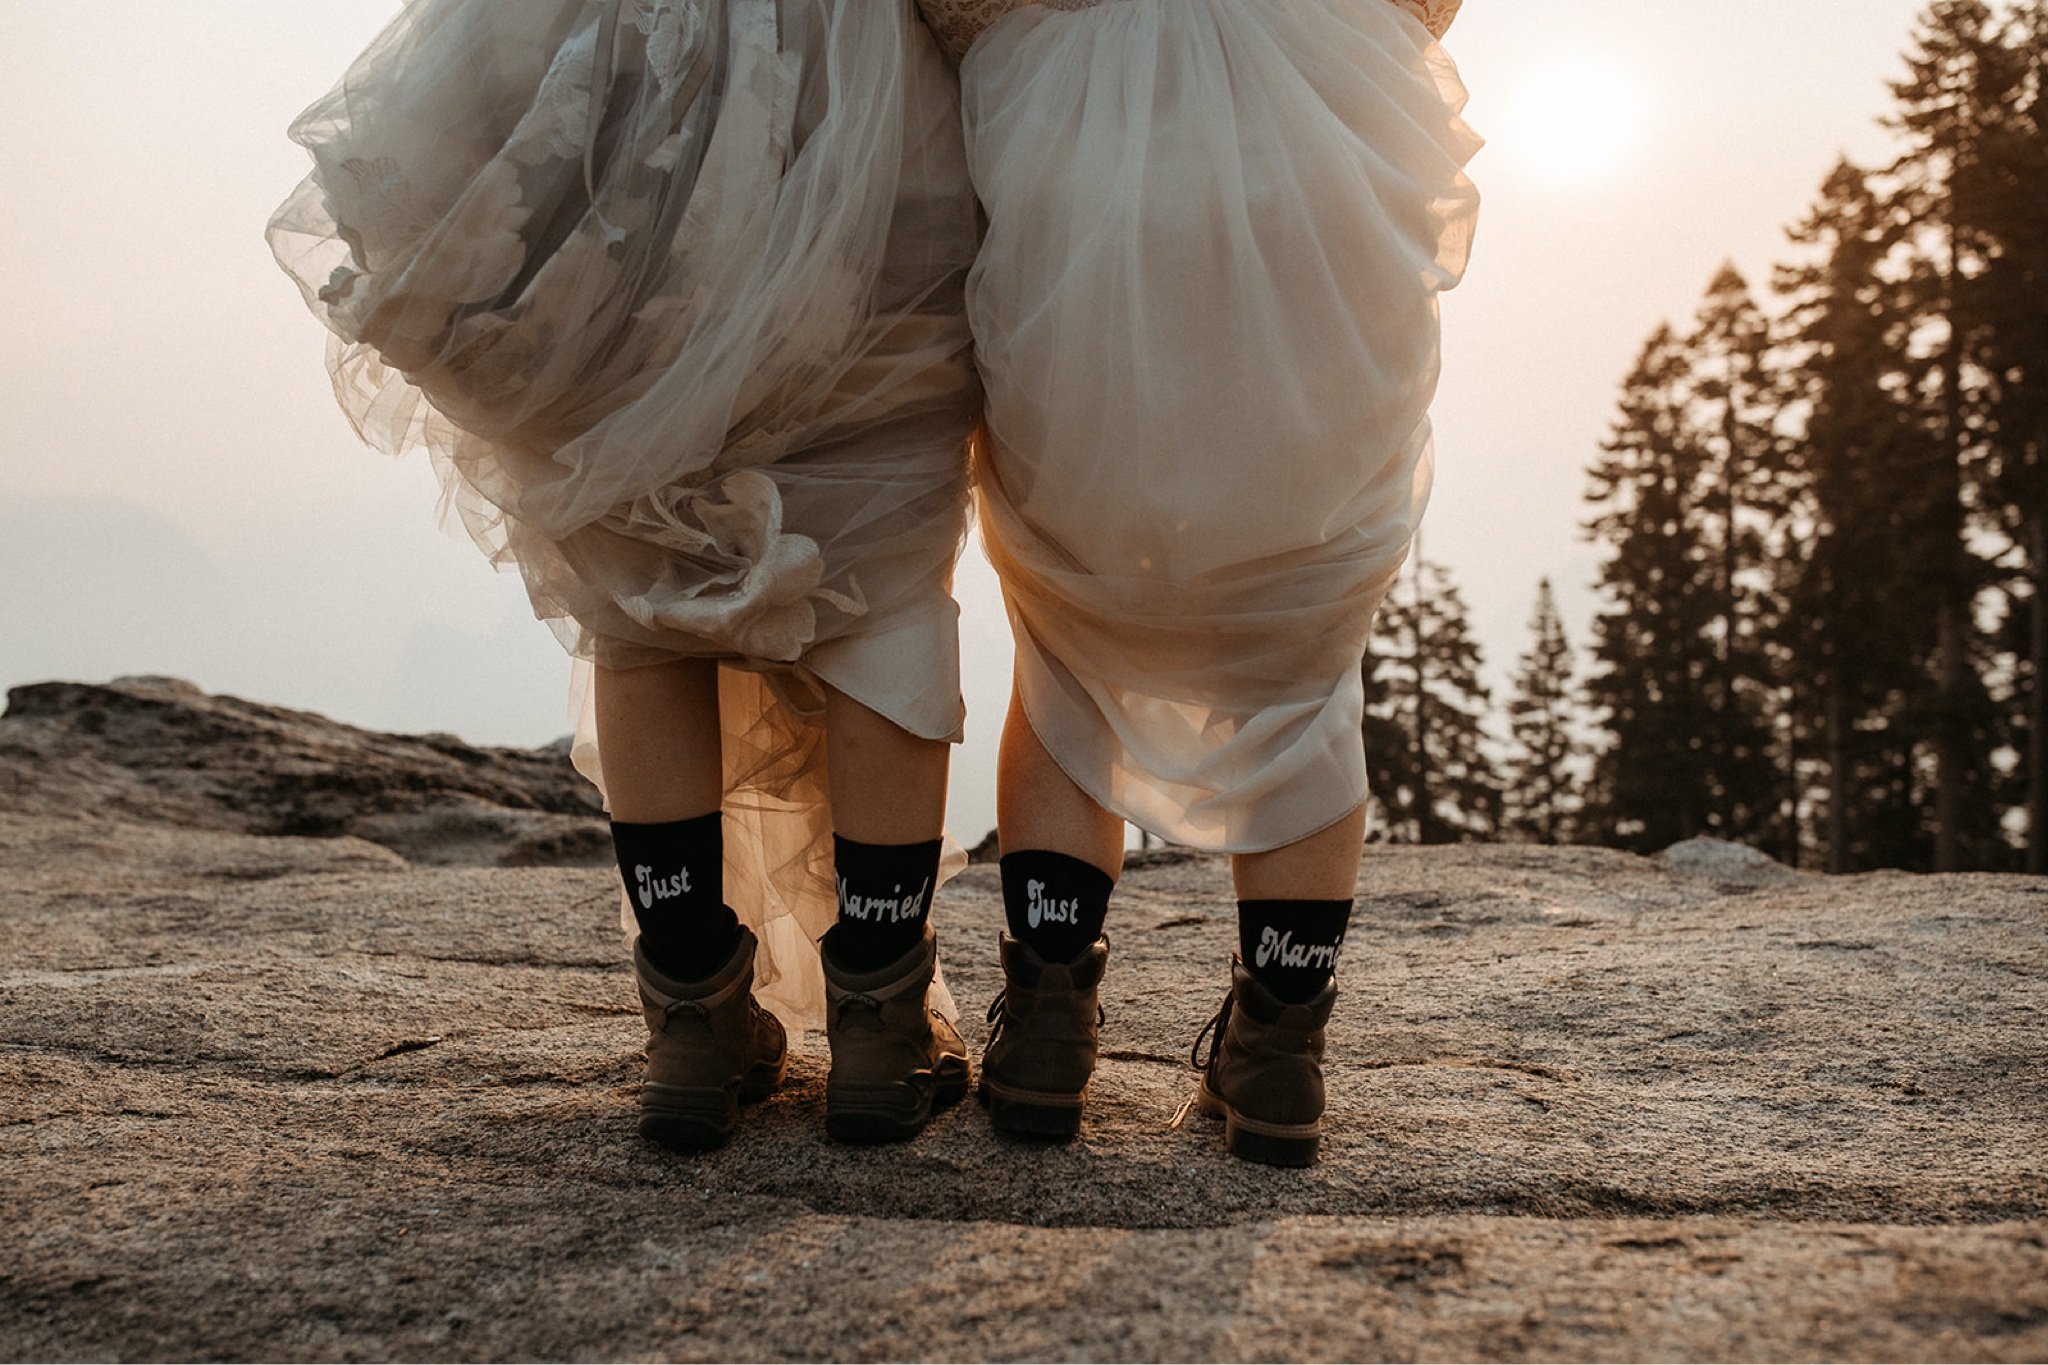 Yosemite National Park Elopement with Two Brides-Will Khoury85.jpg